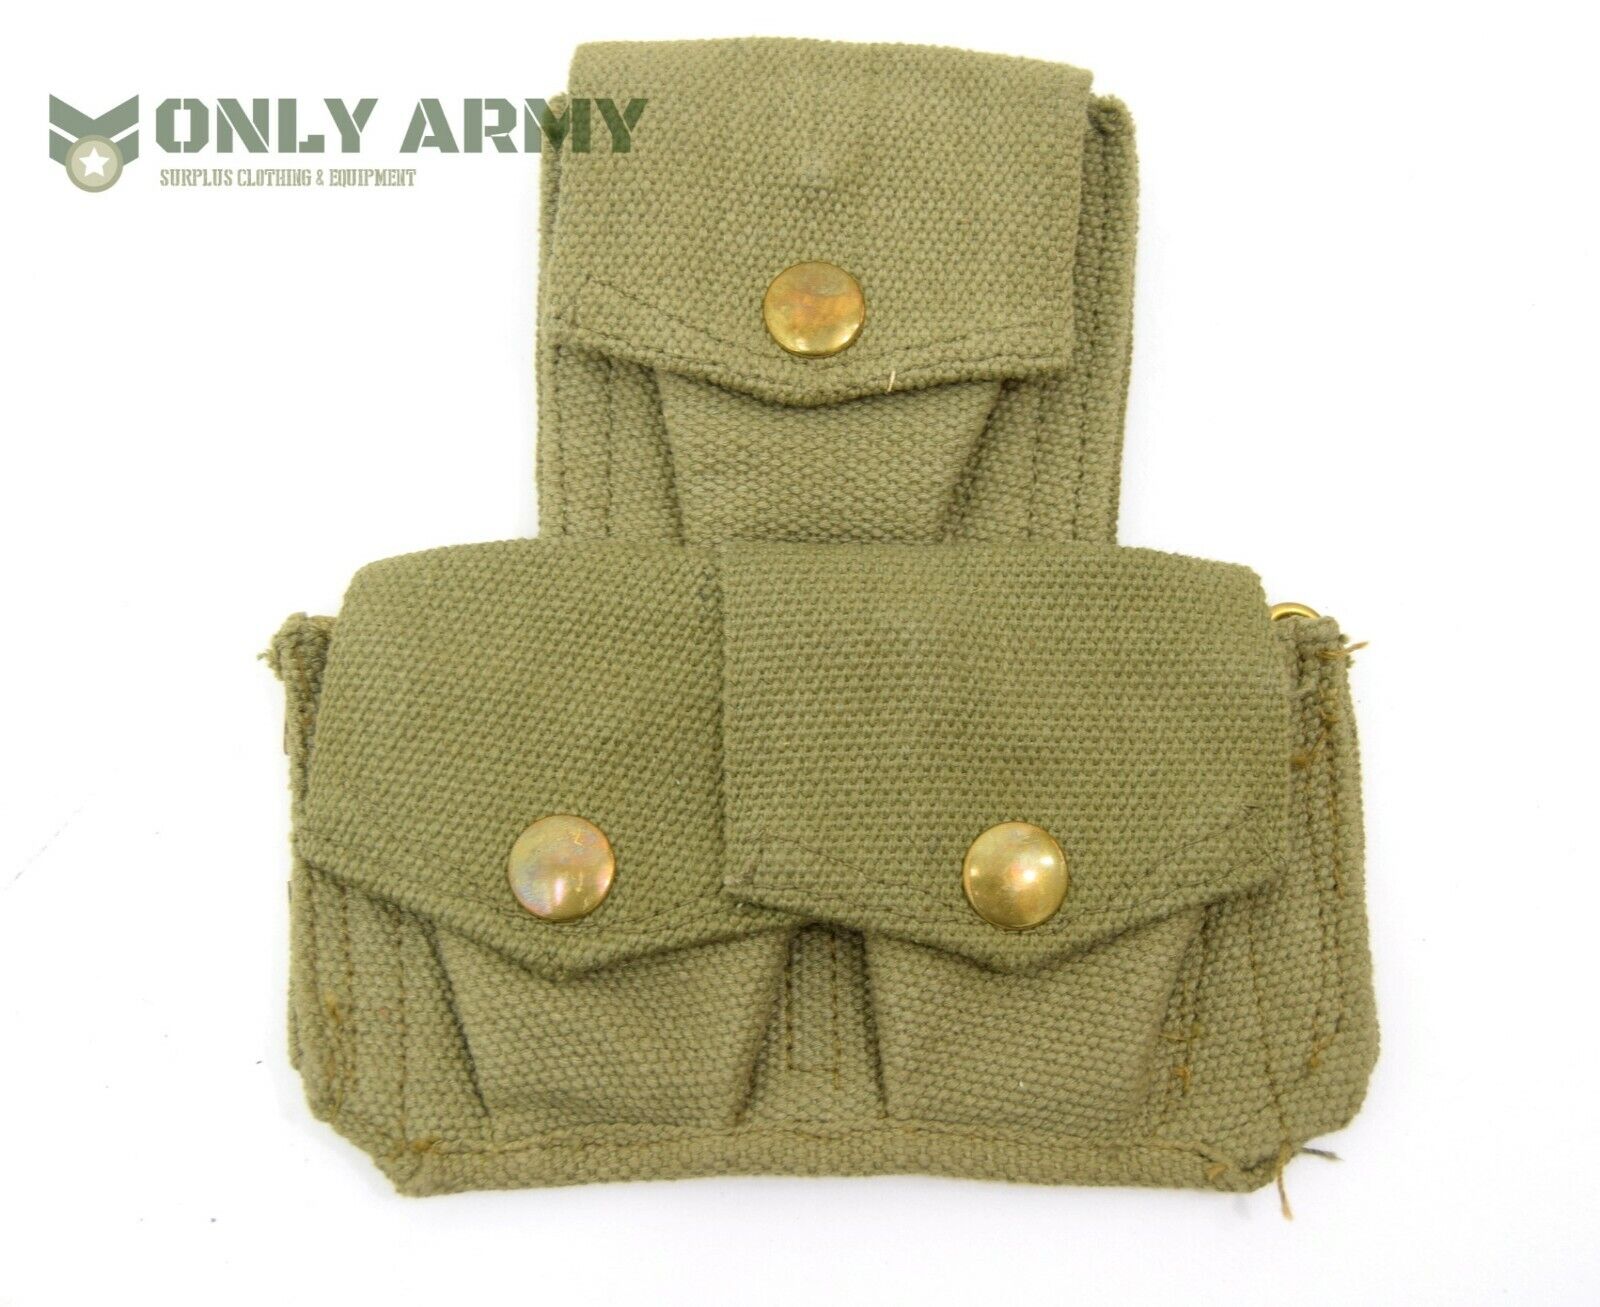 ENFIELD .303 AMMO POUCH WEBBING CANVAS BRITISH ARMY ISSUE 1937 PAT WW2 POUCHES